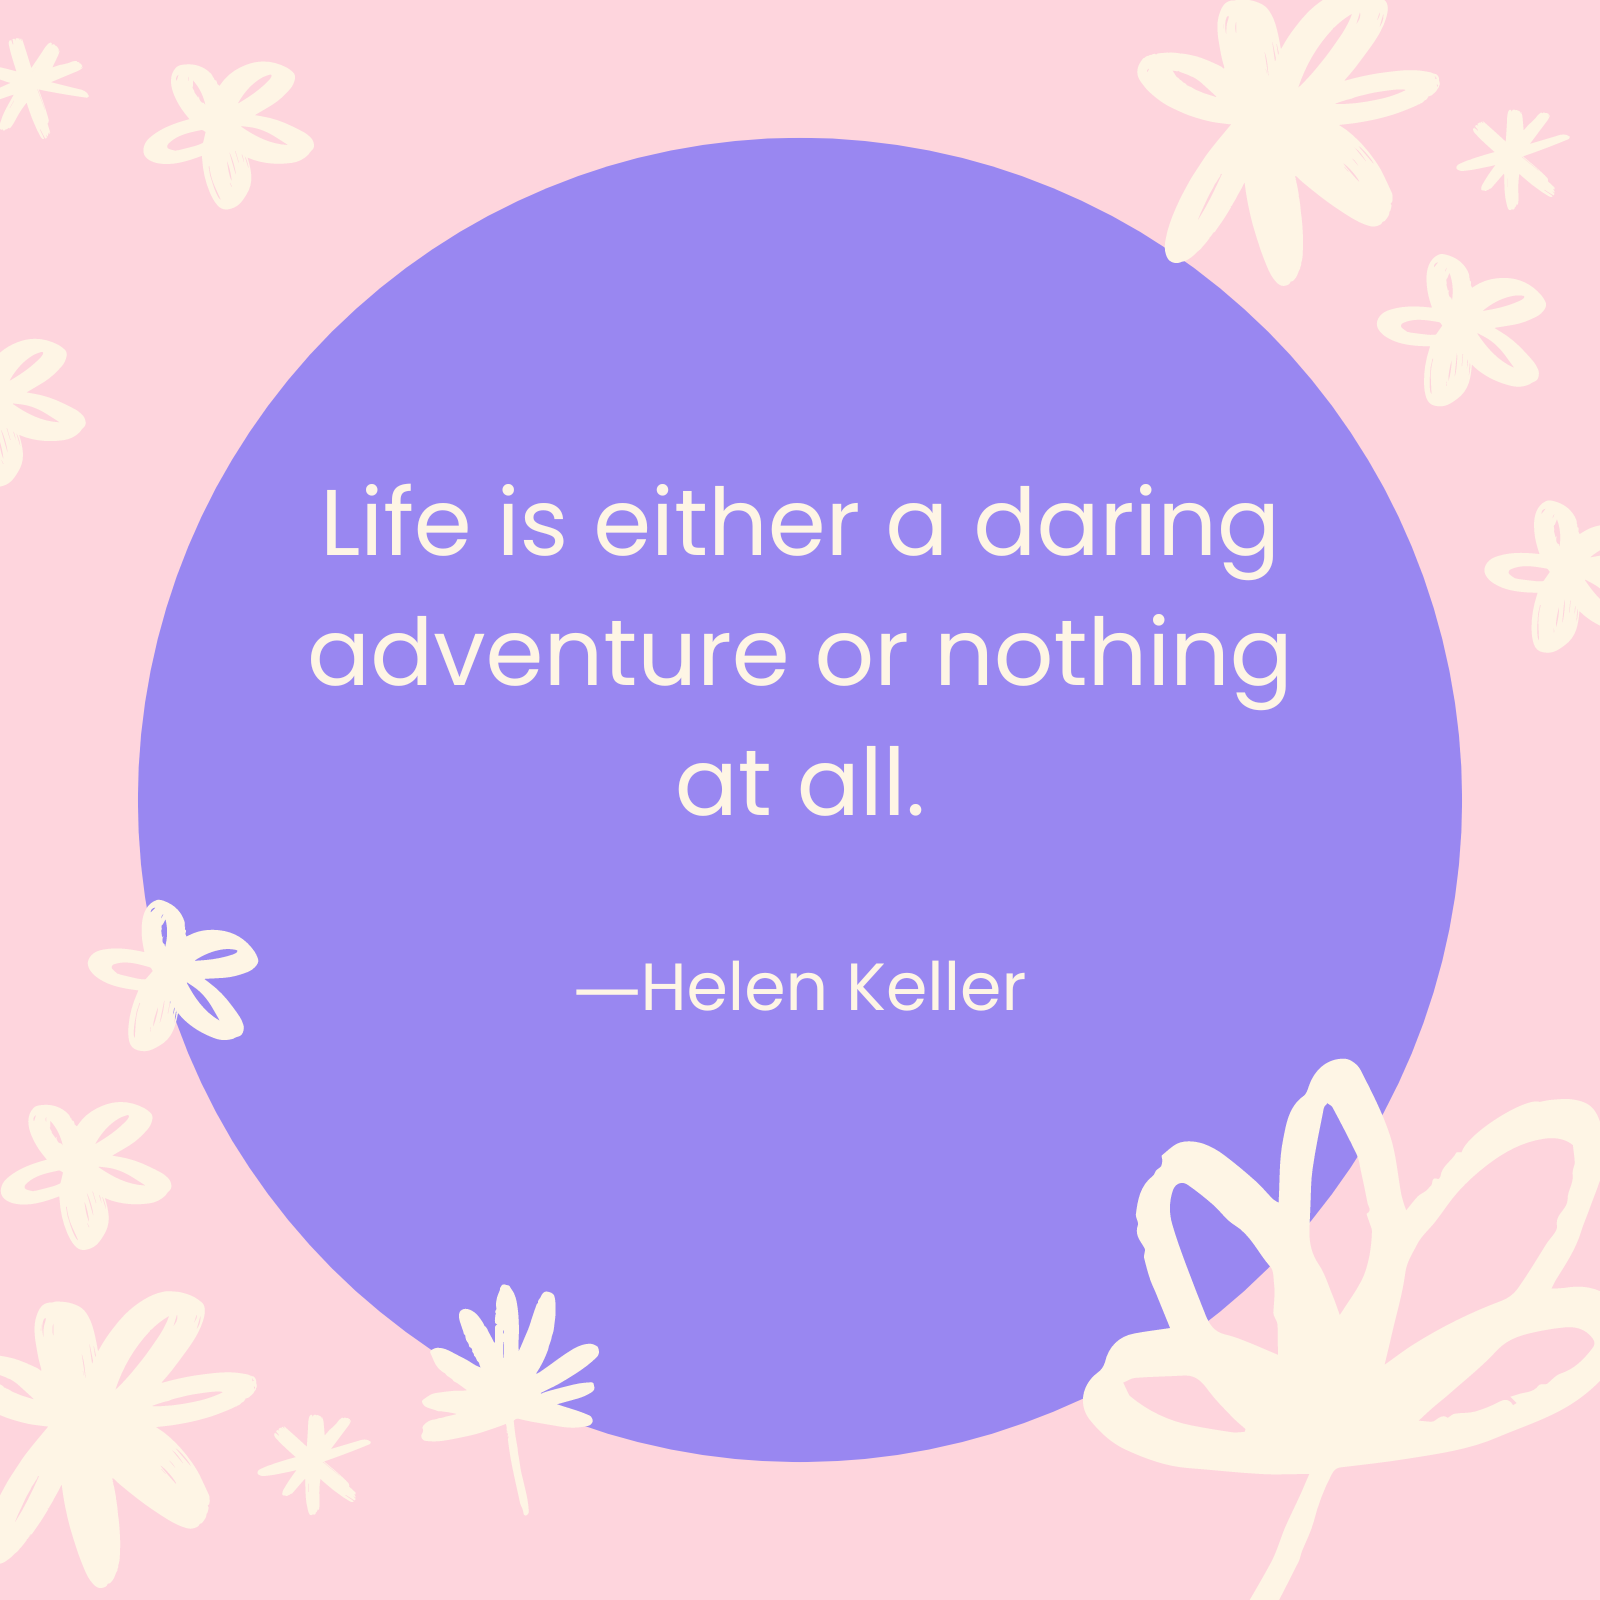 <p>"Life is either a daring adventure or nothing at all." —Helen Keller</p>